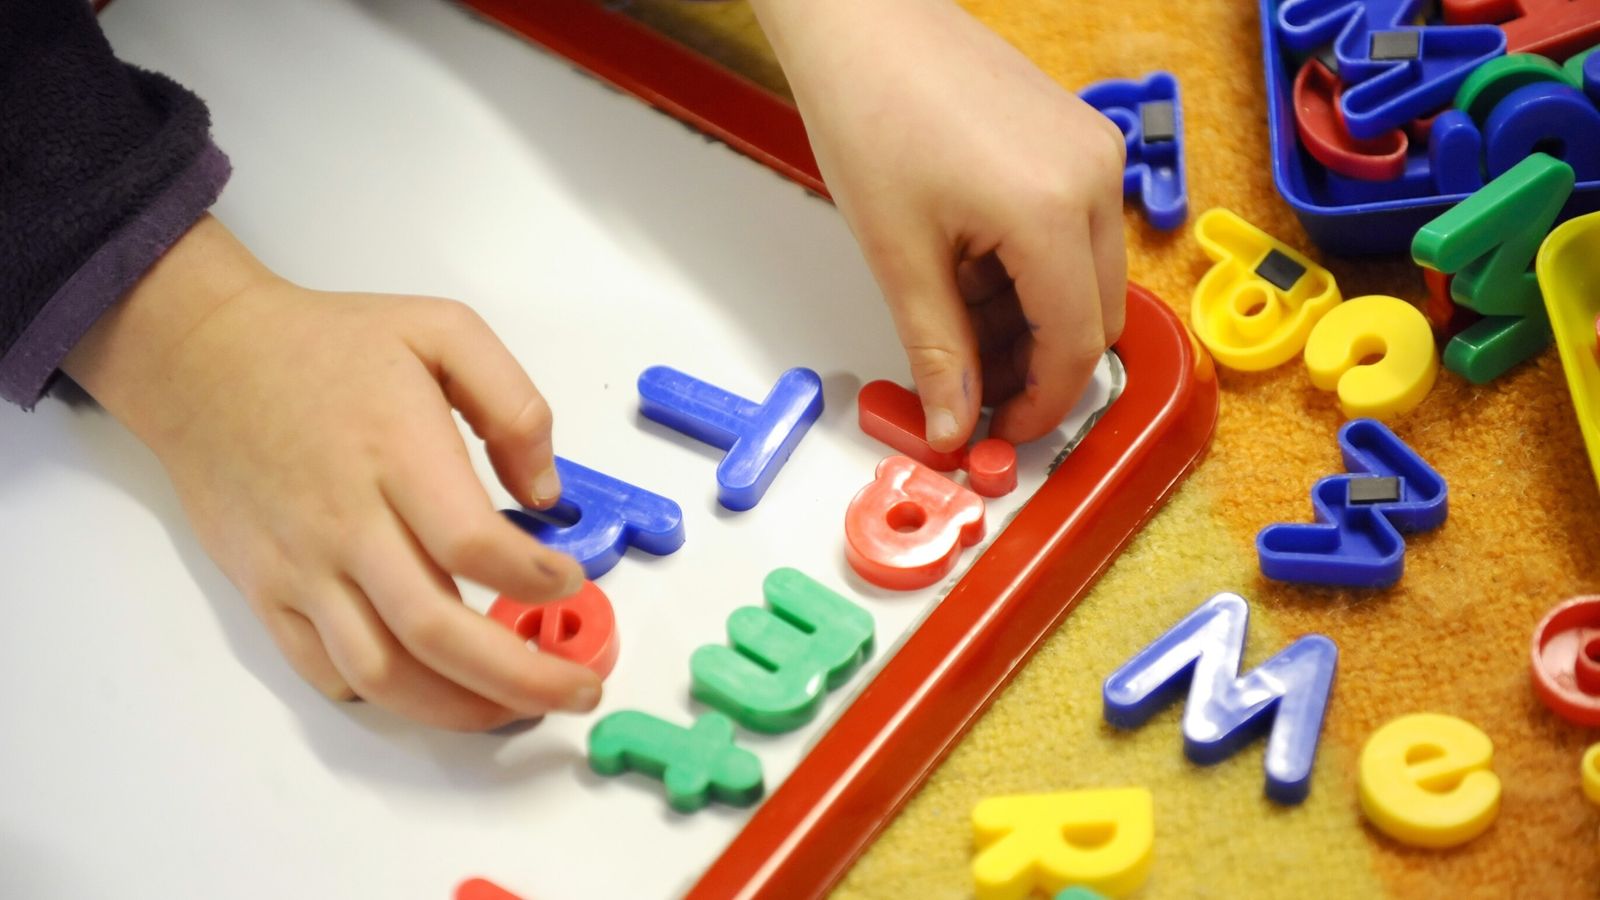 Labour considers plans for thousands of new nursery places in primary schools